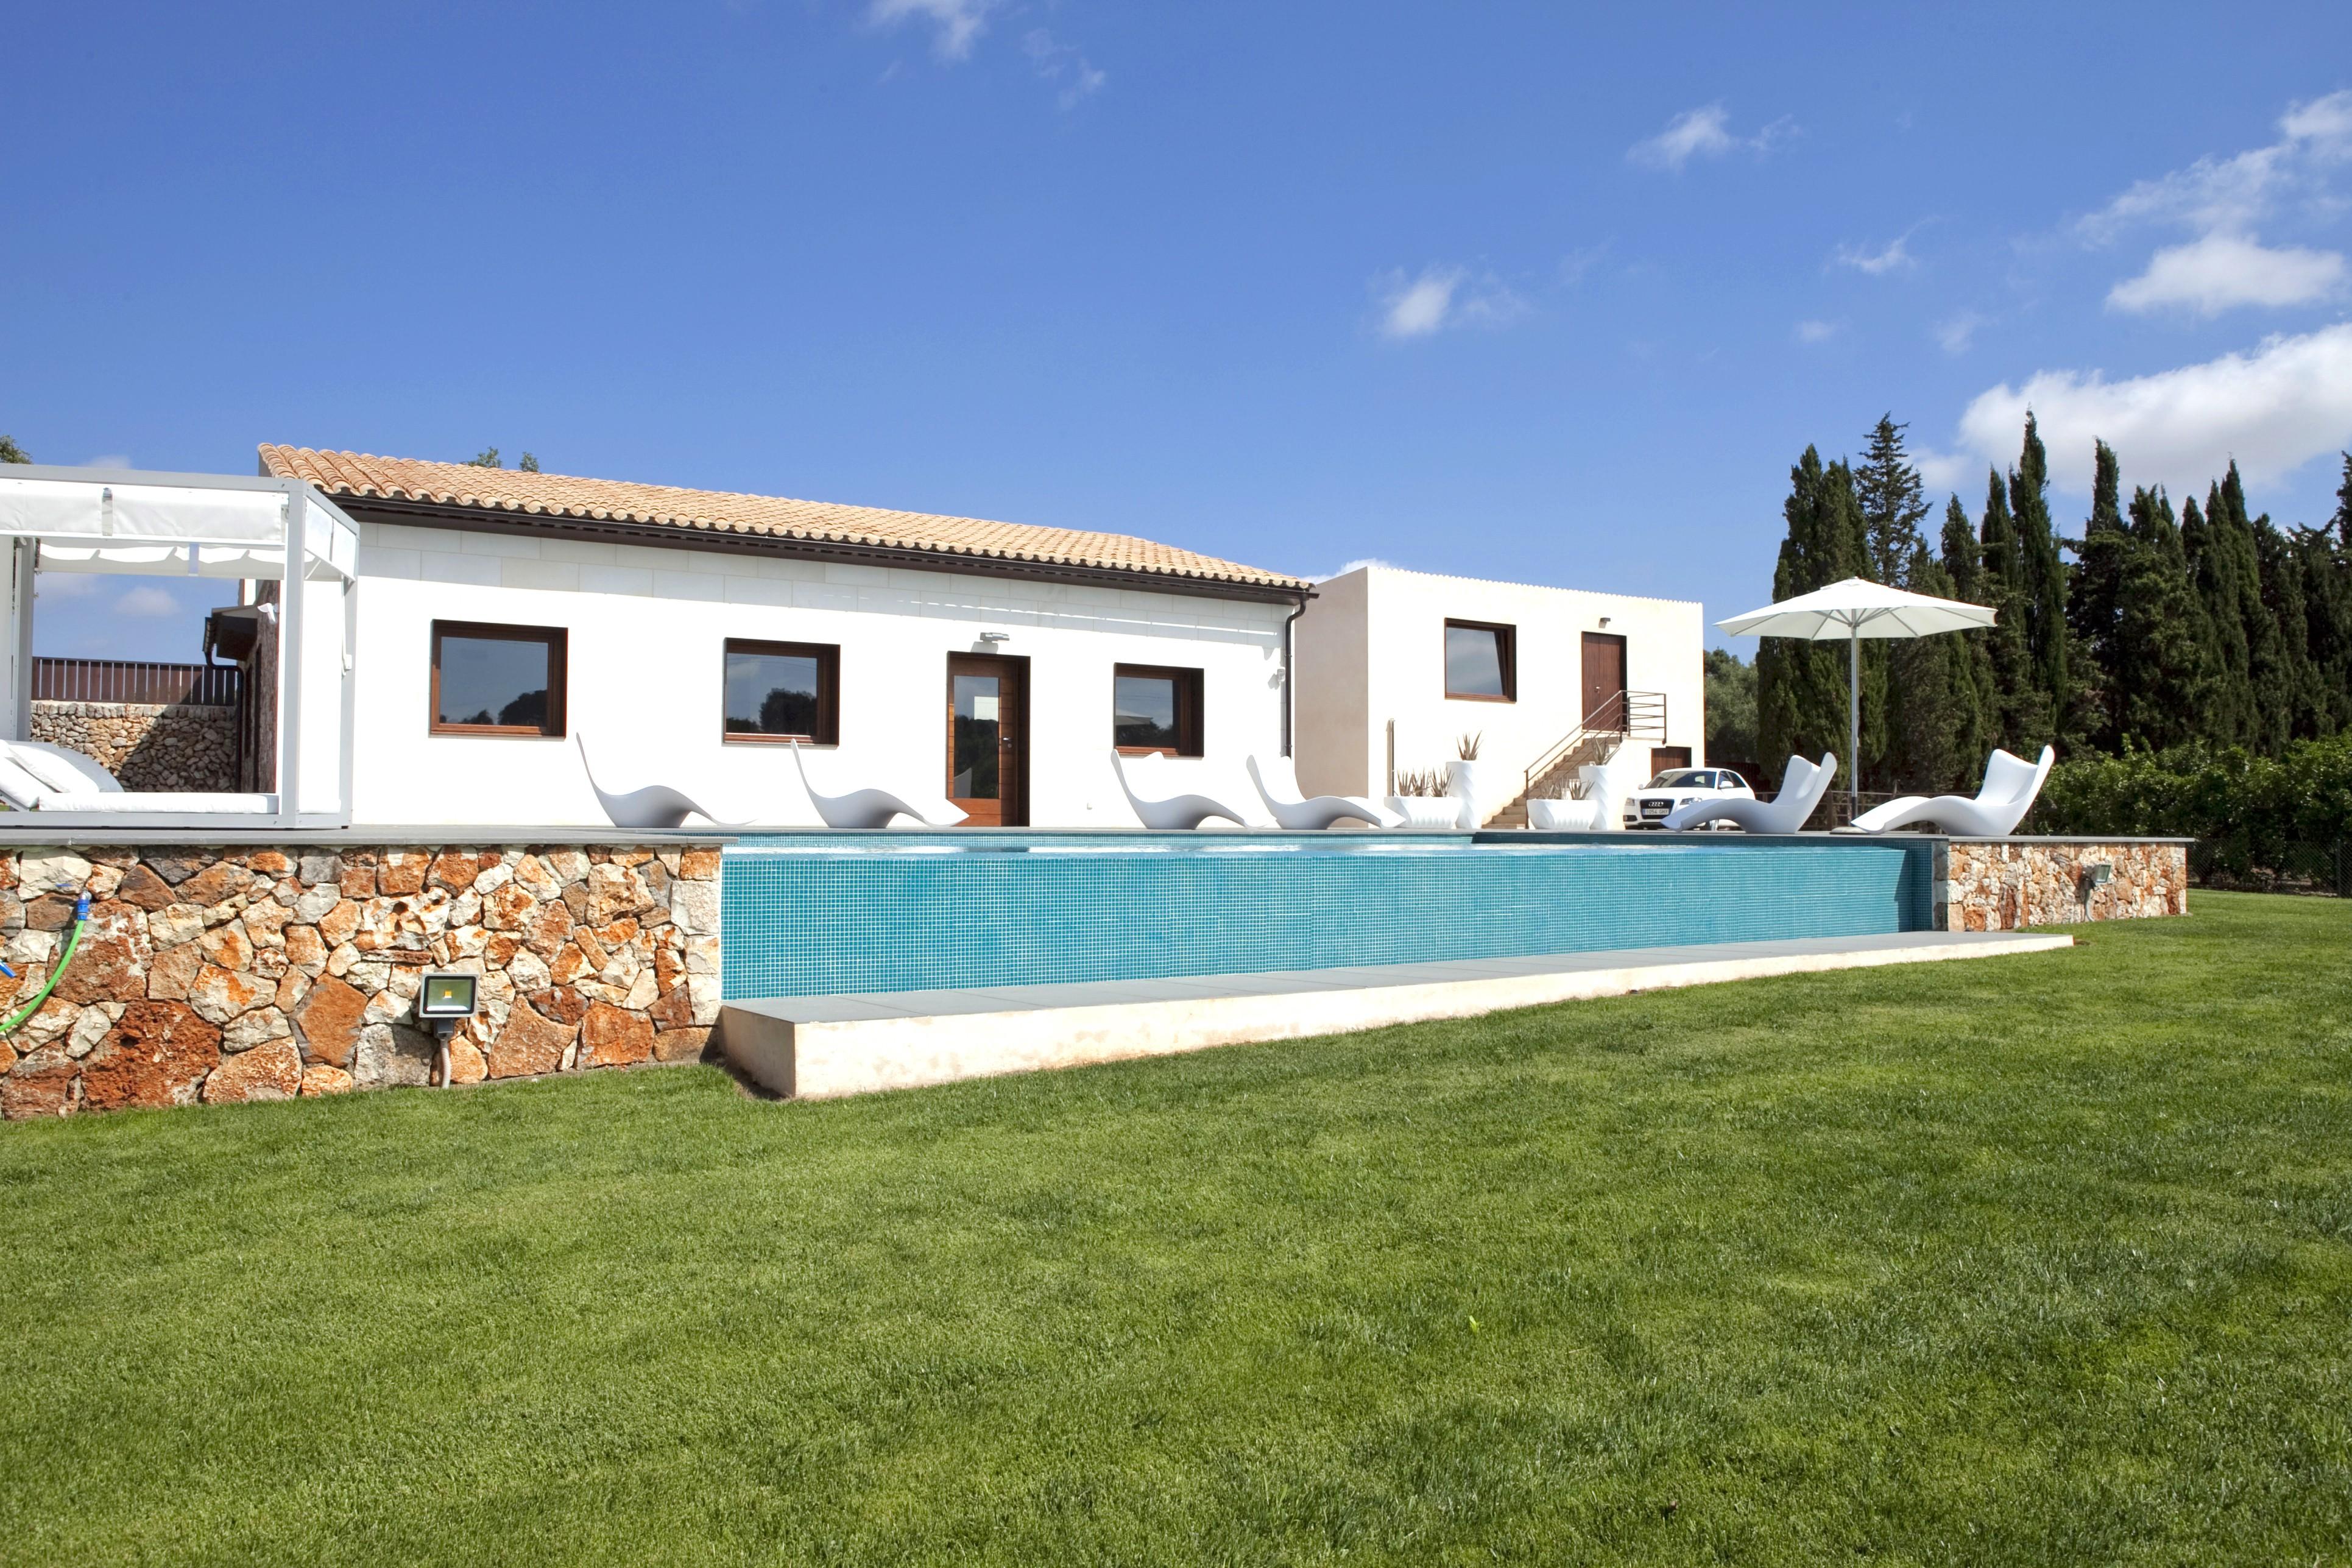 Property Image 1 - SON CALET - Villa with private pool in Llubí. Free WiFi